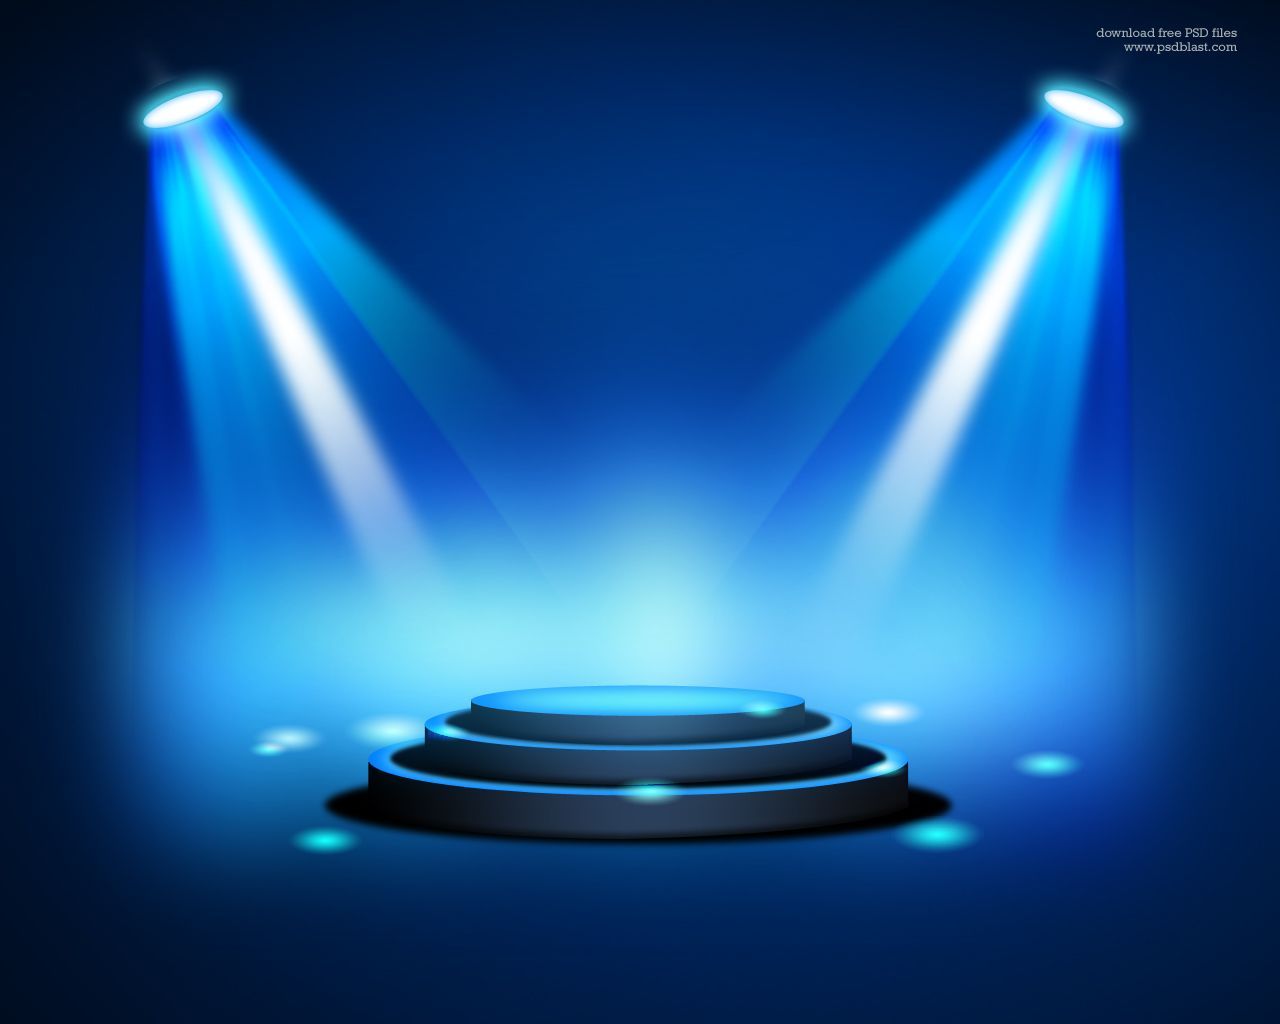 Stage Lighting Background with Spot Light Effects (PSD). Lighting